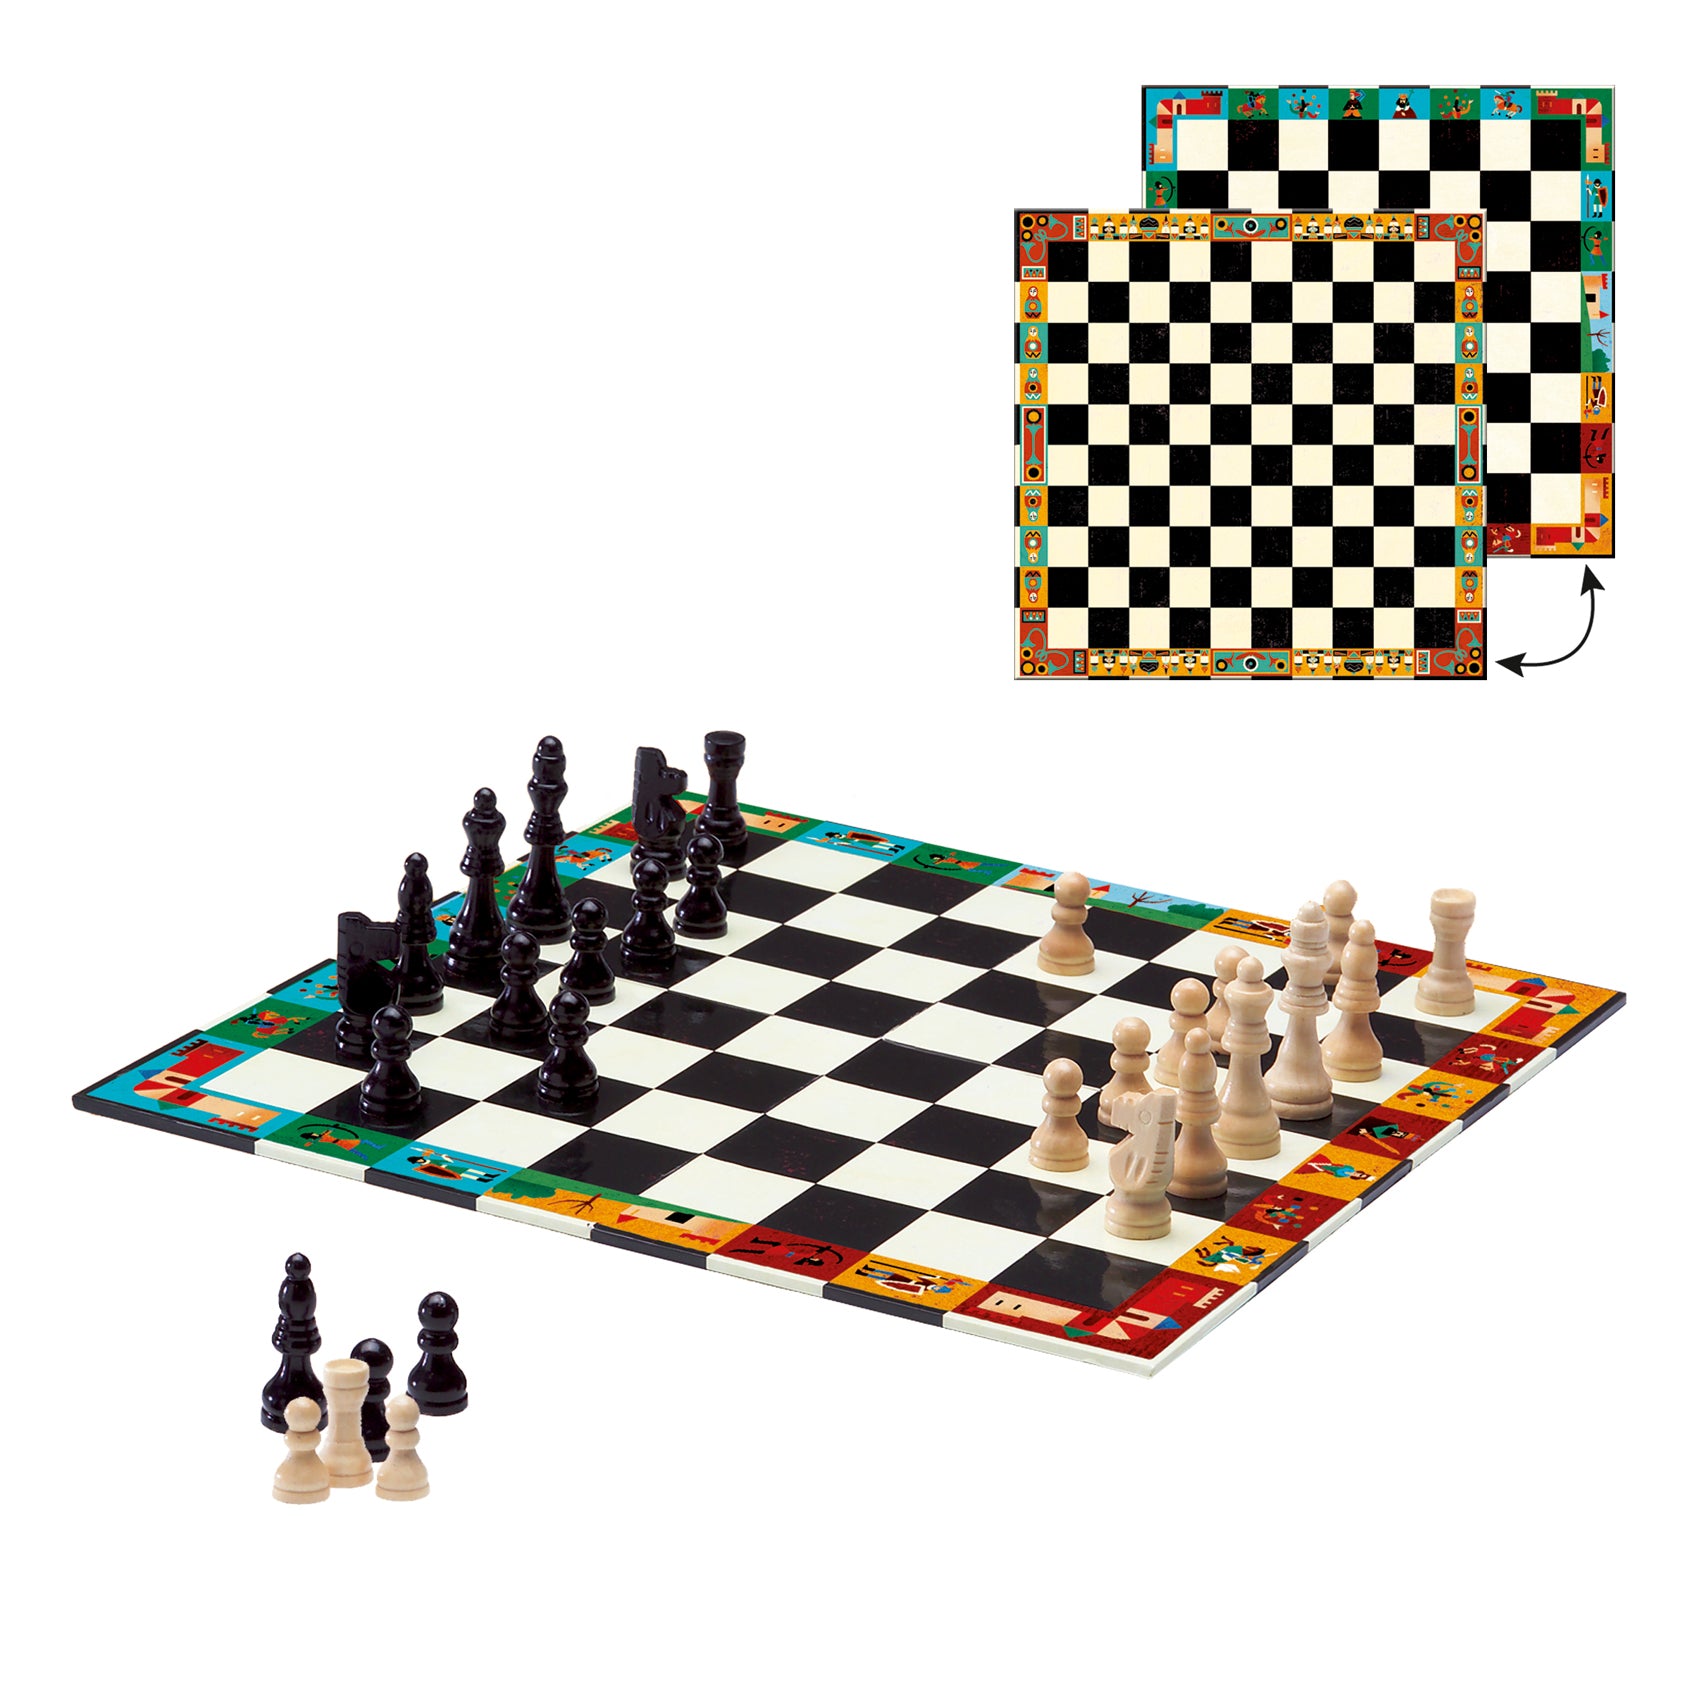 Djeco Chess and Draughts